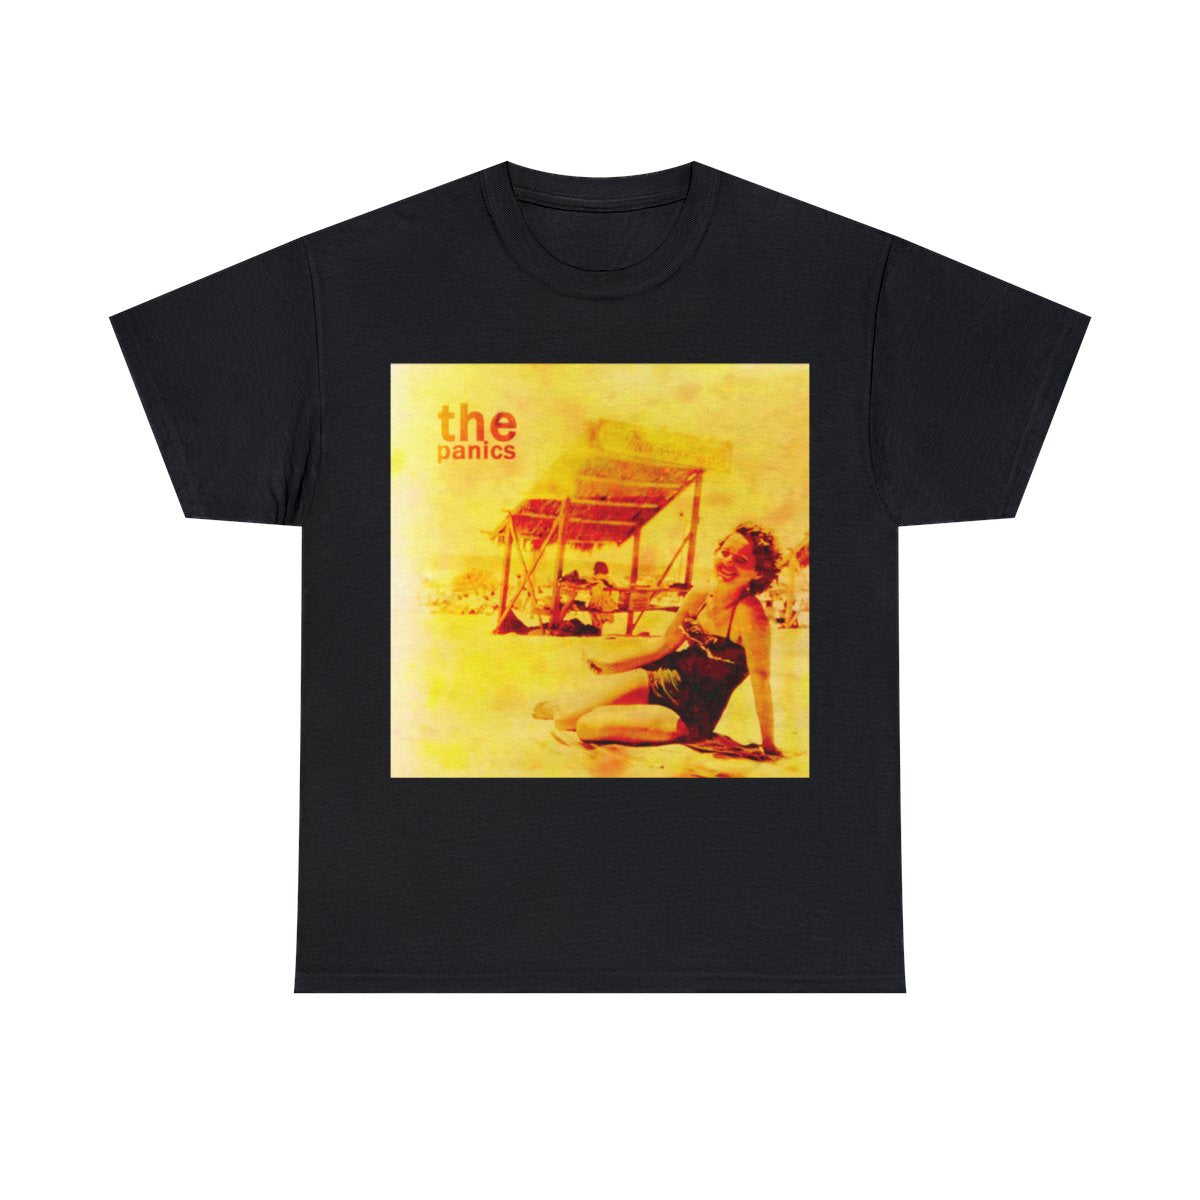 The Panics - A House on a Street in a Town I'm From - Album Cover T-Shirt